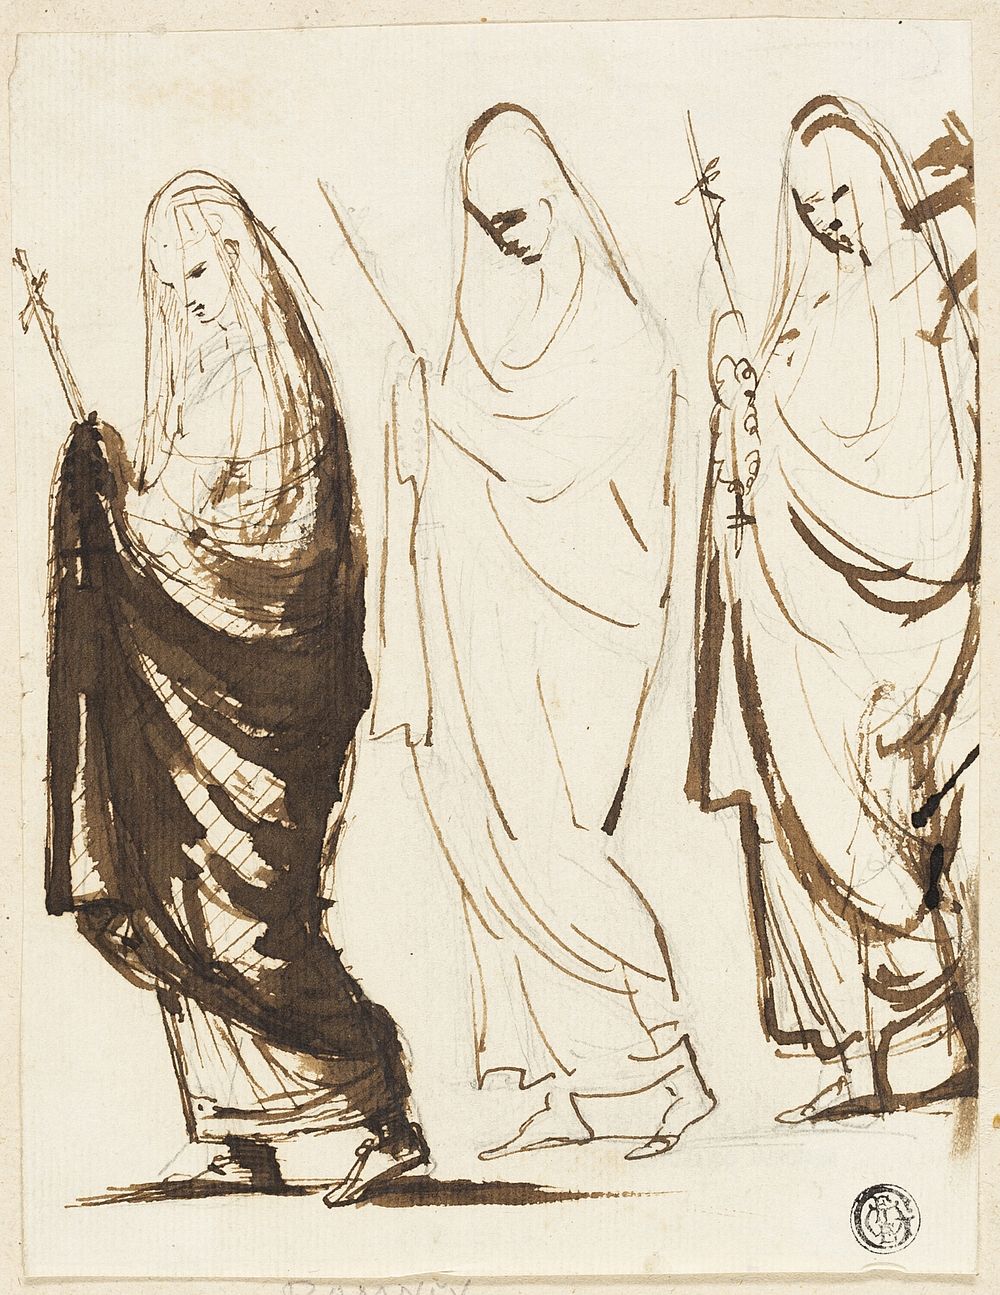 Procession of Three Draped Women Holding Crosses or Sceptres by George Romney